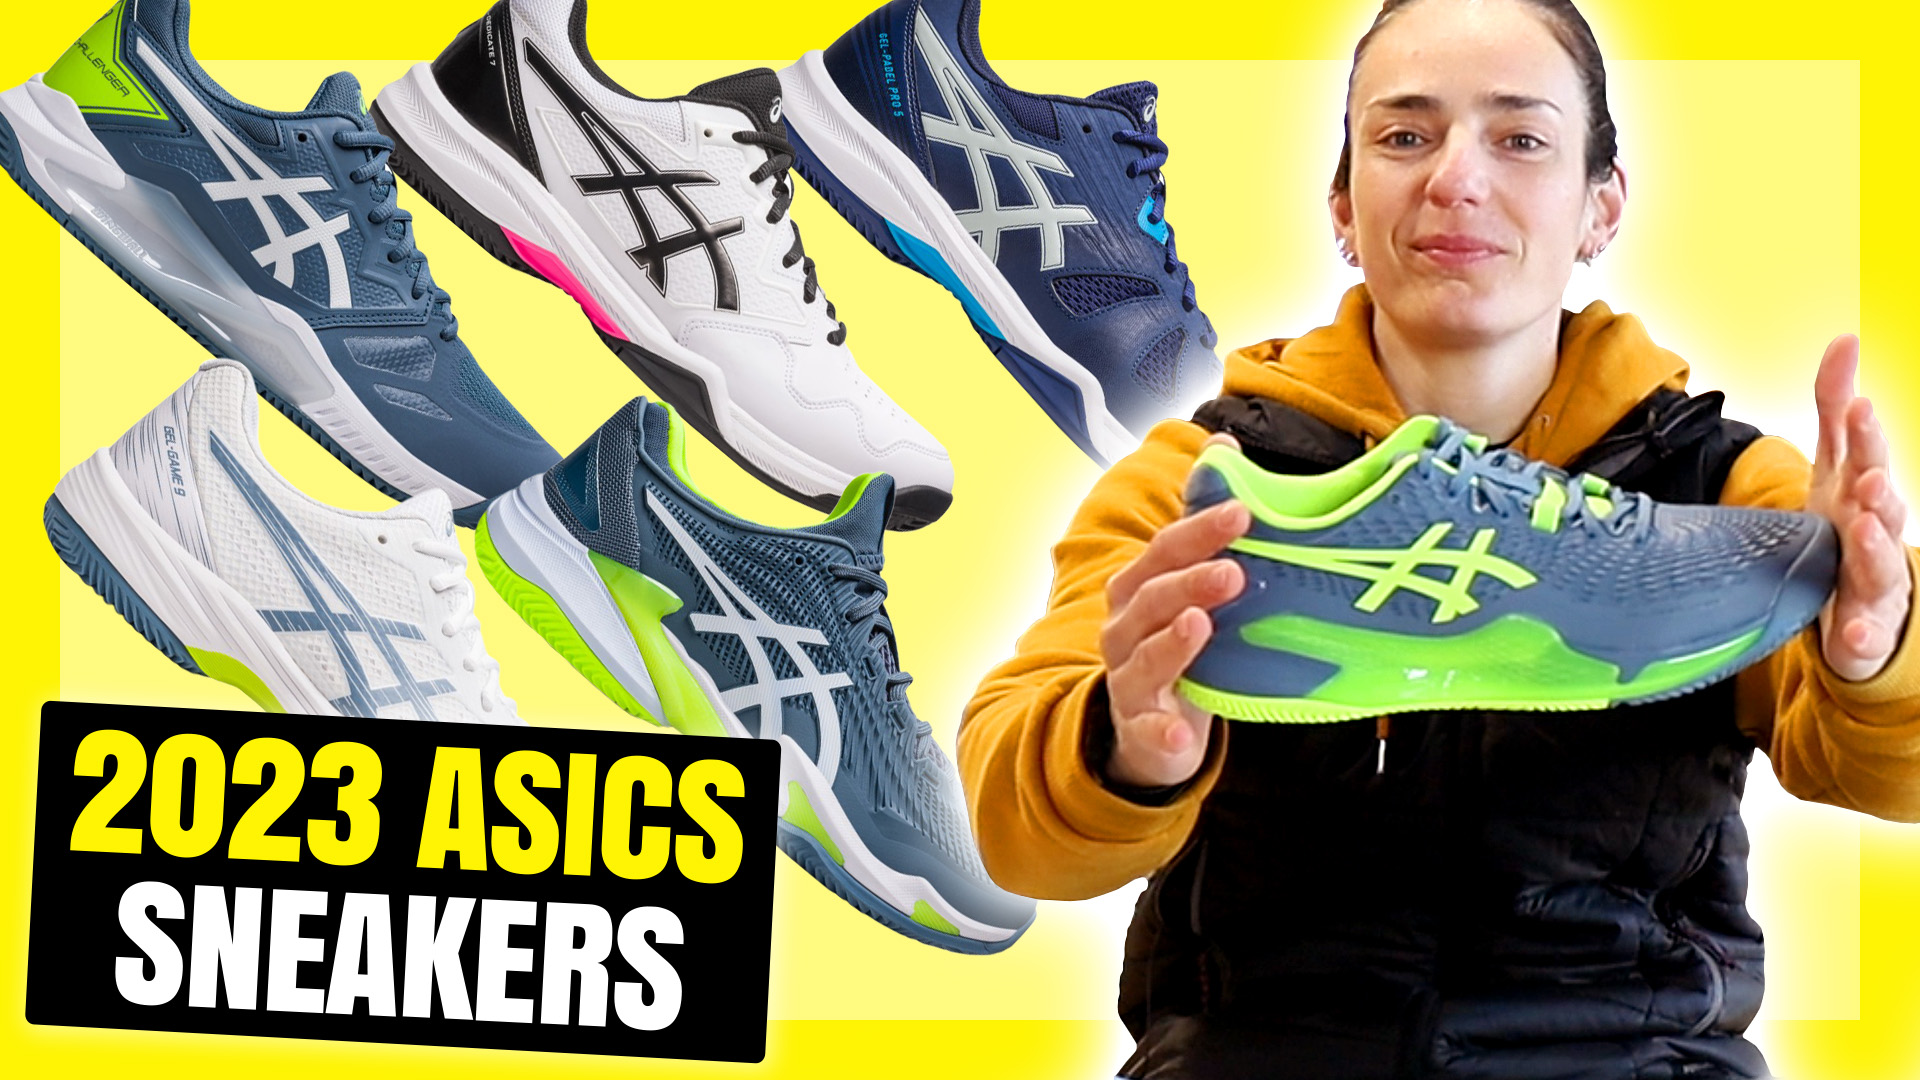 Asics 2023 padel shoes collection, new soles and technologies adapted to  each track - Zona de Padel